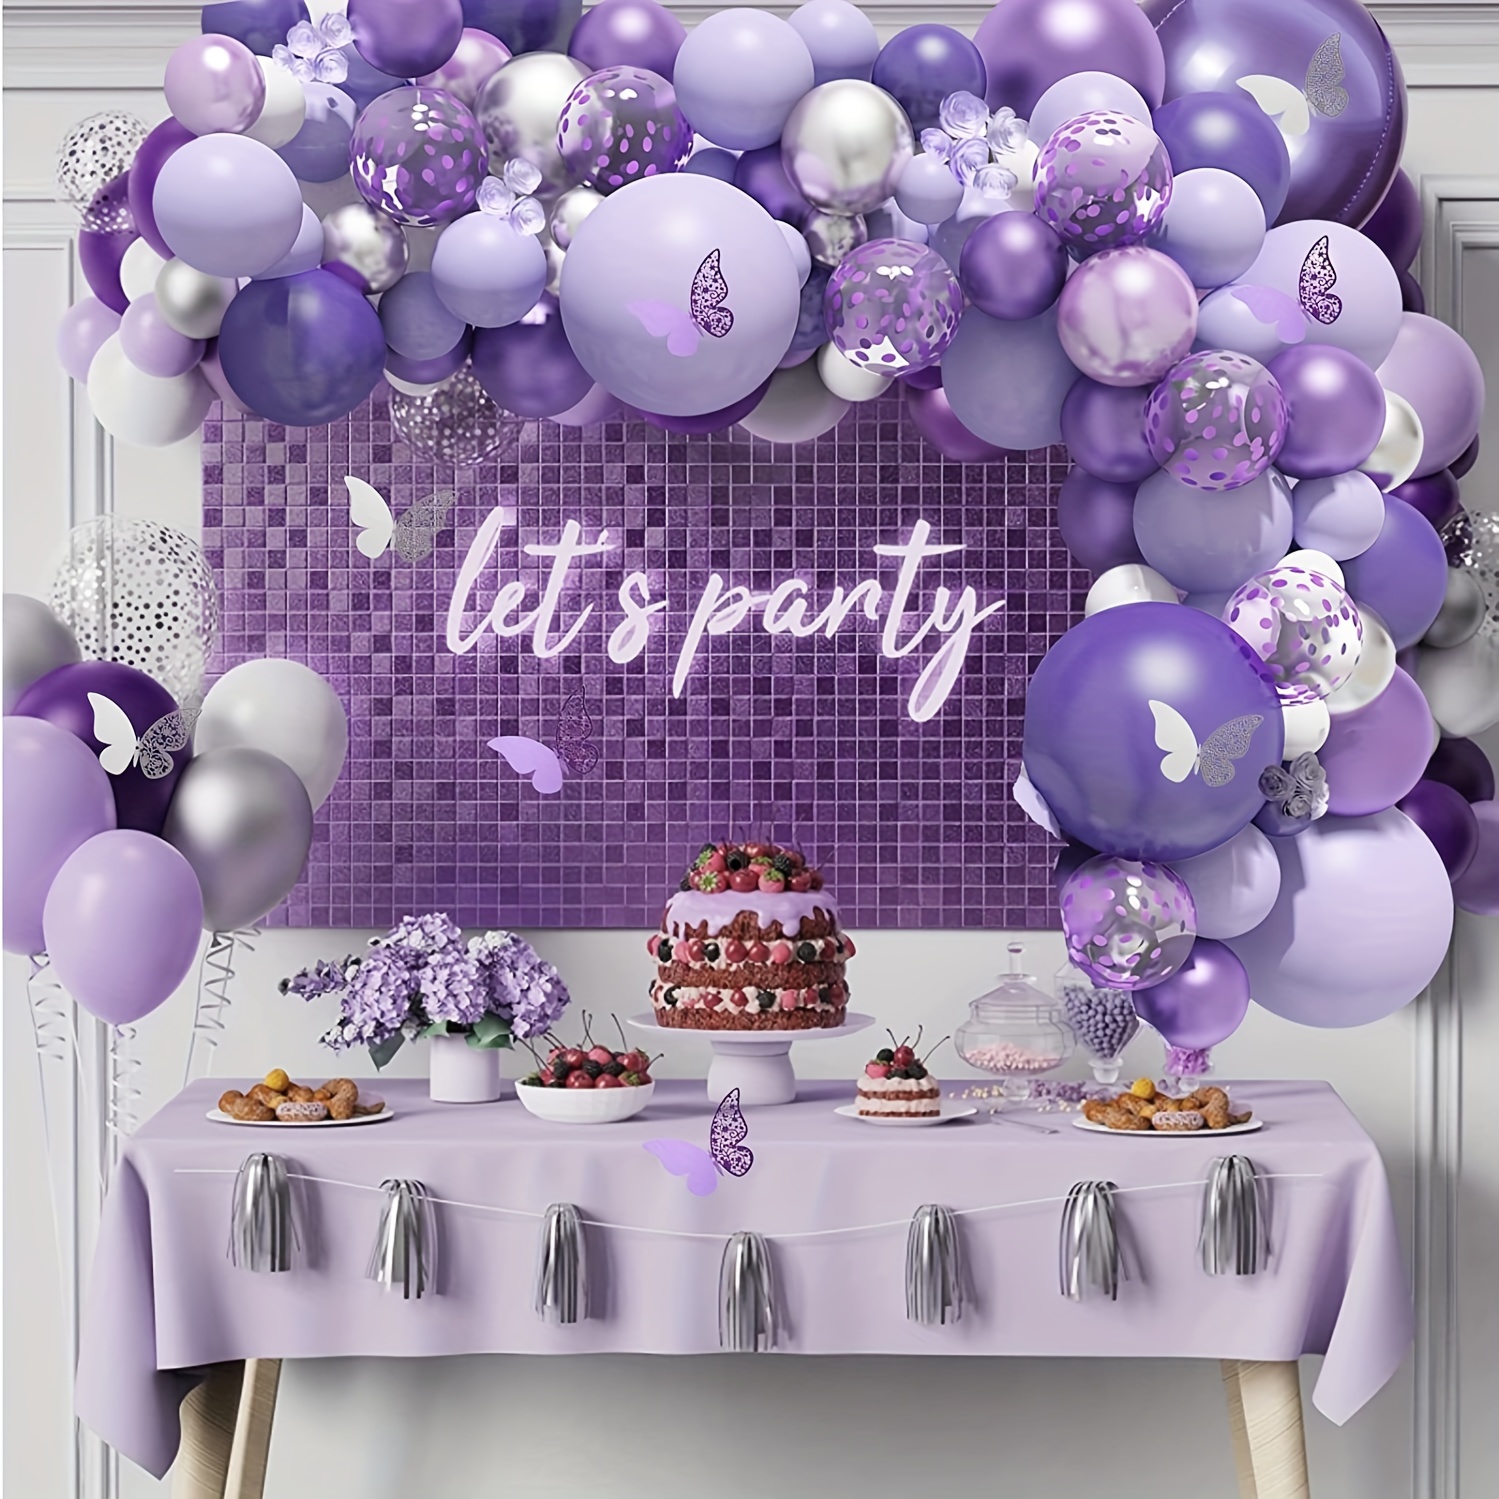 Purple Happy Birthday Banner Party Decorations Purple White Balloons  Garlands Lavender Mermaid Birthday Themed Party Streamers - AliExpress